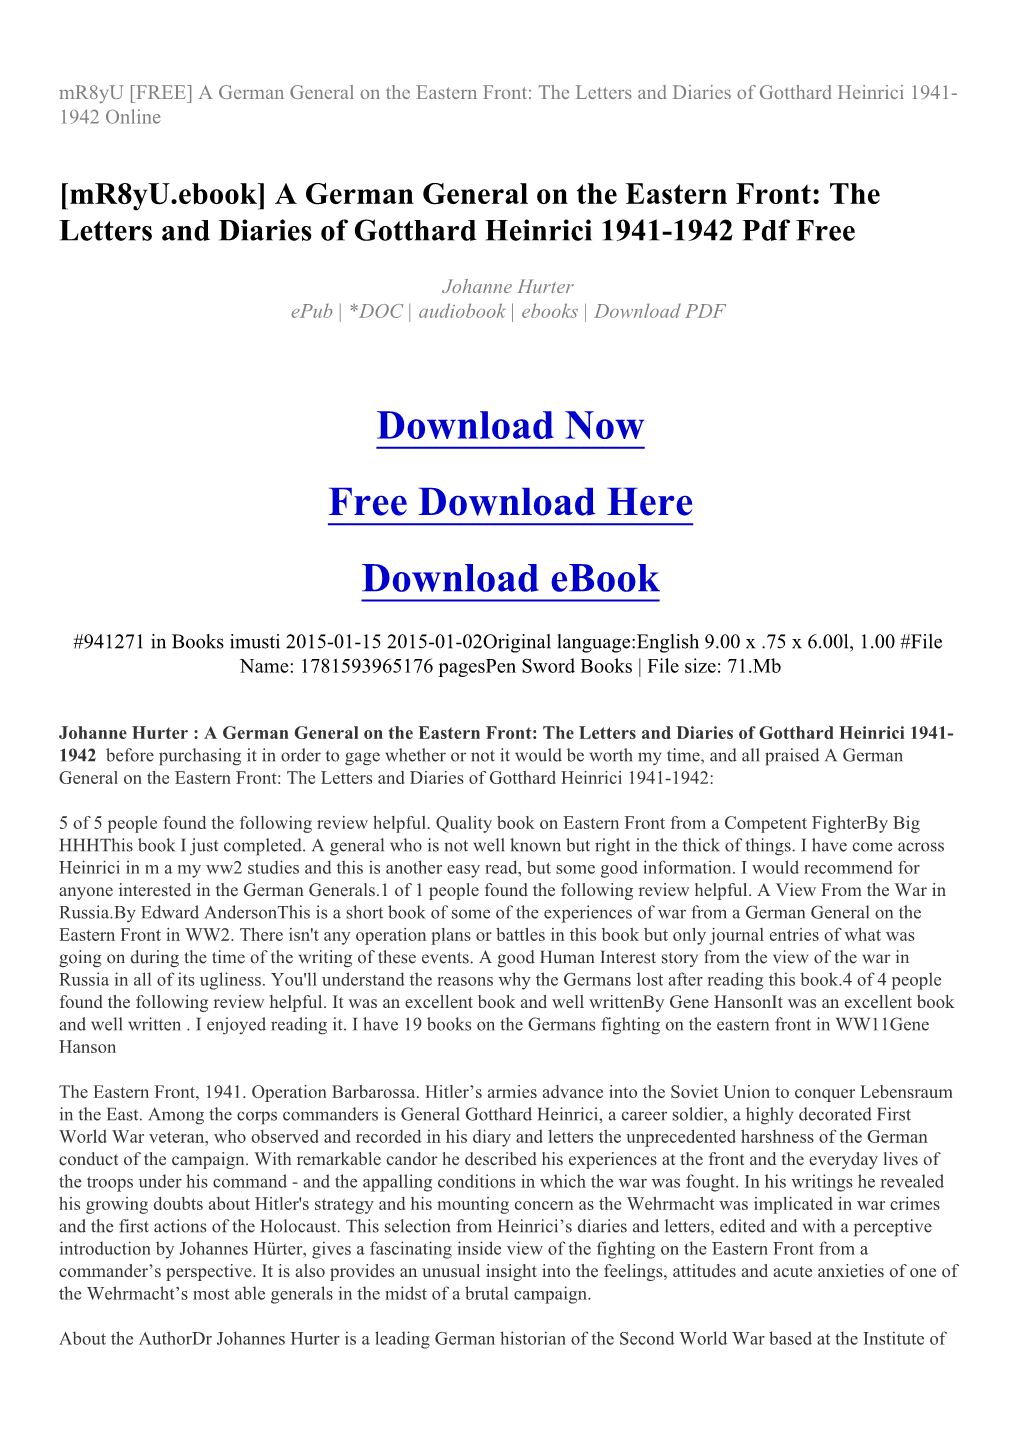 A German General on the Eastern Front: the Letters and Diaries of Gotthard Heinrici 1941- 1942 Online